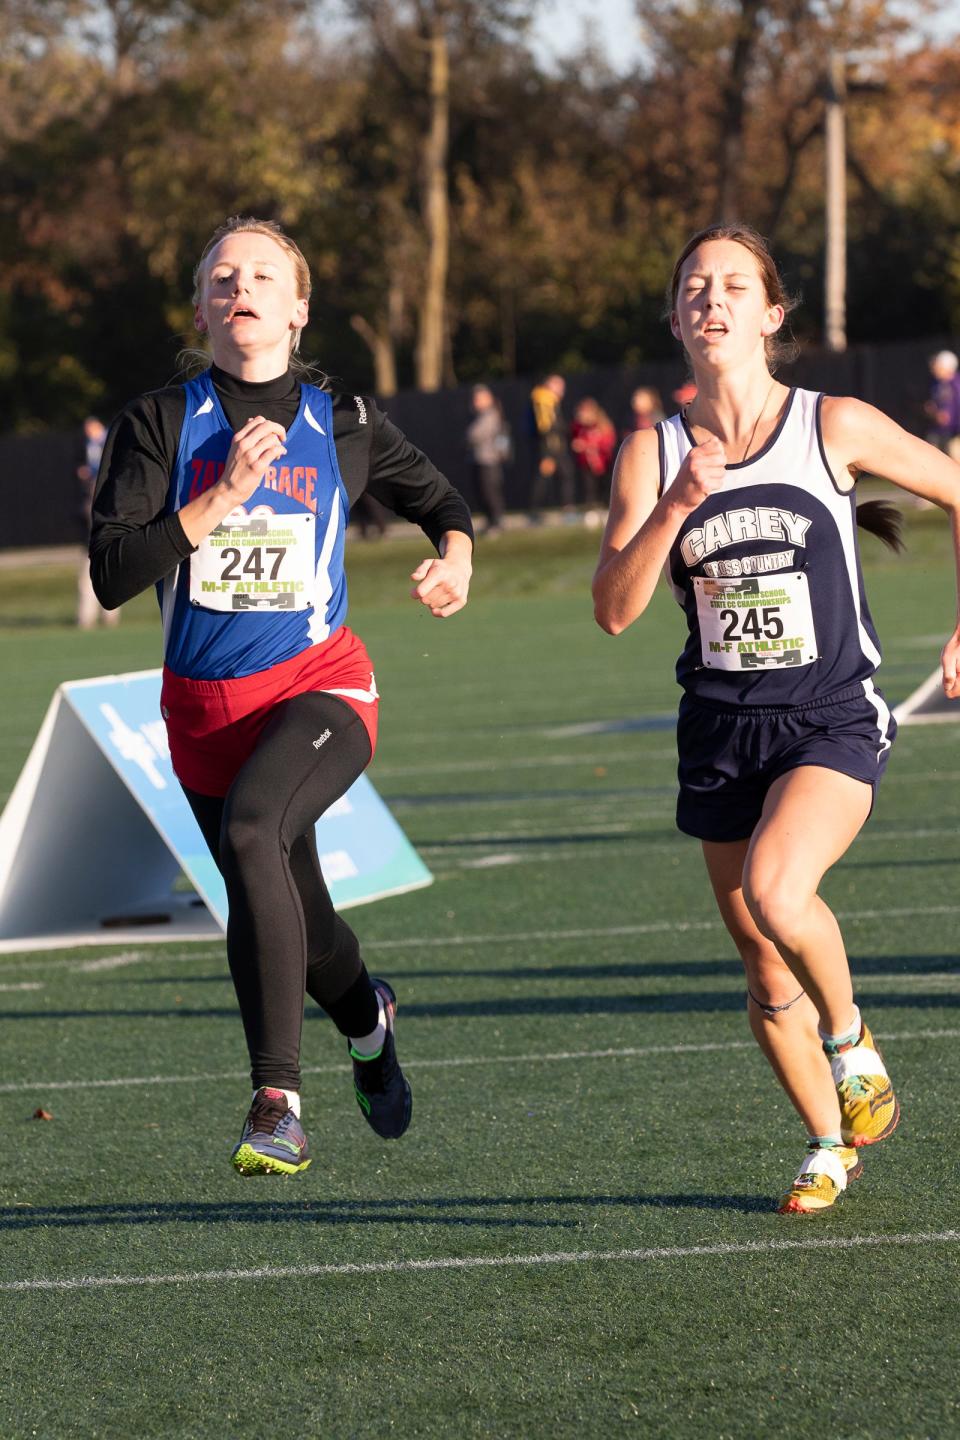 Zane Trace’s Marie Souther (247) took All-Ohio honors after placing 12th with a time of 18:53.8 in the DIII girls 2021 OHSAA High School State Cross Country Championships at Fortress Obetz on Nov. 6, 2021. She was named the Gazette's female cross country runner of the year.